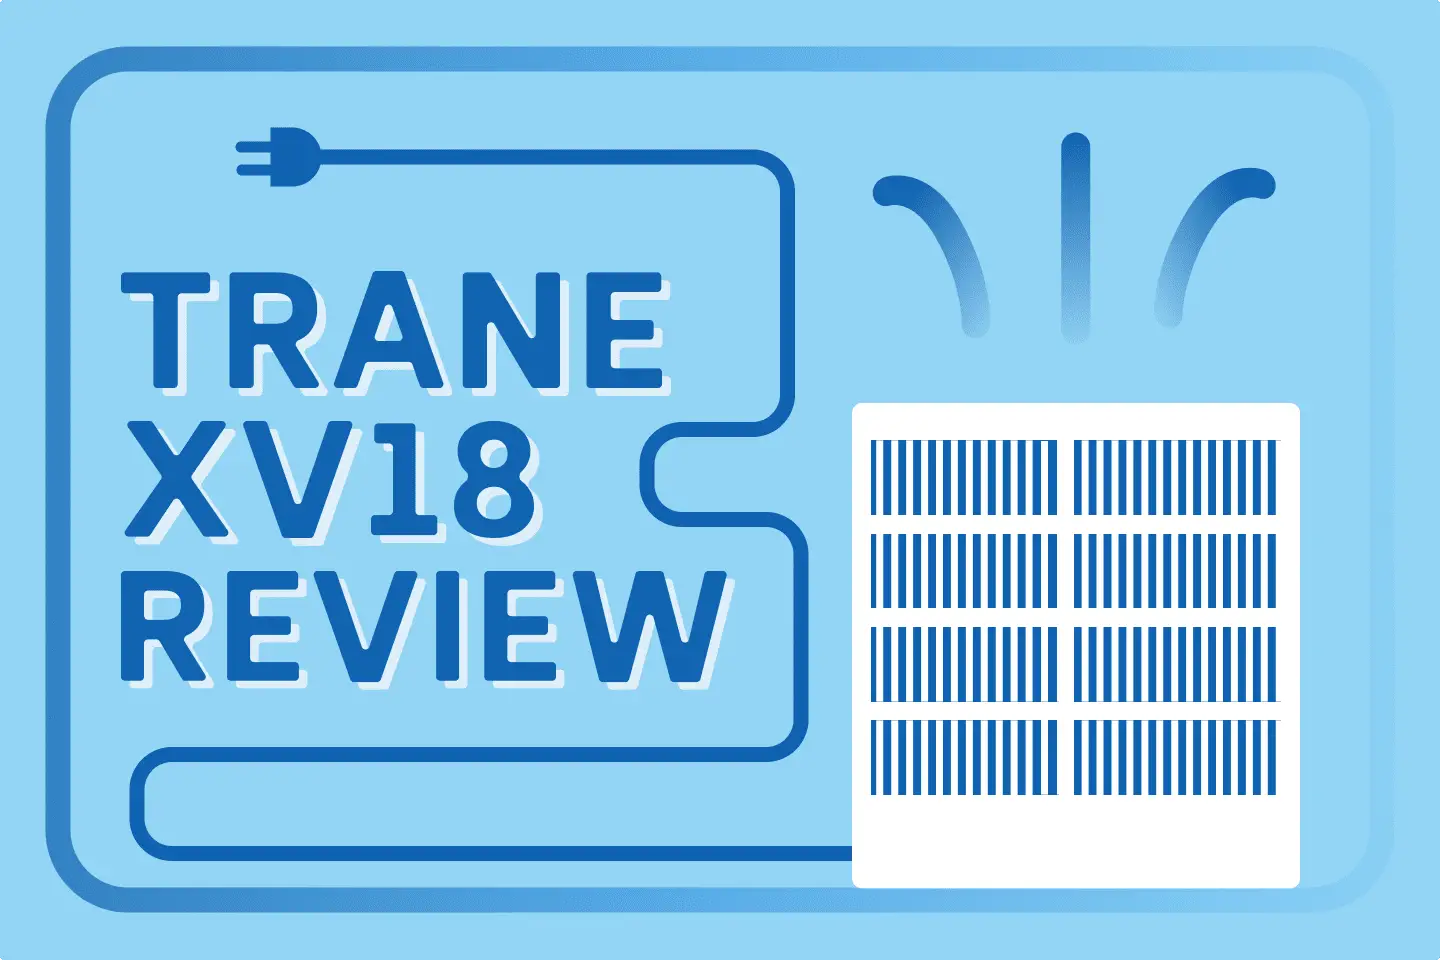 Trane XV18 Air Conditioner After 1 Year [In-Depth Review]